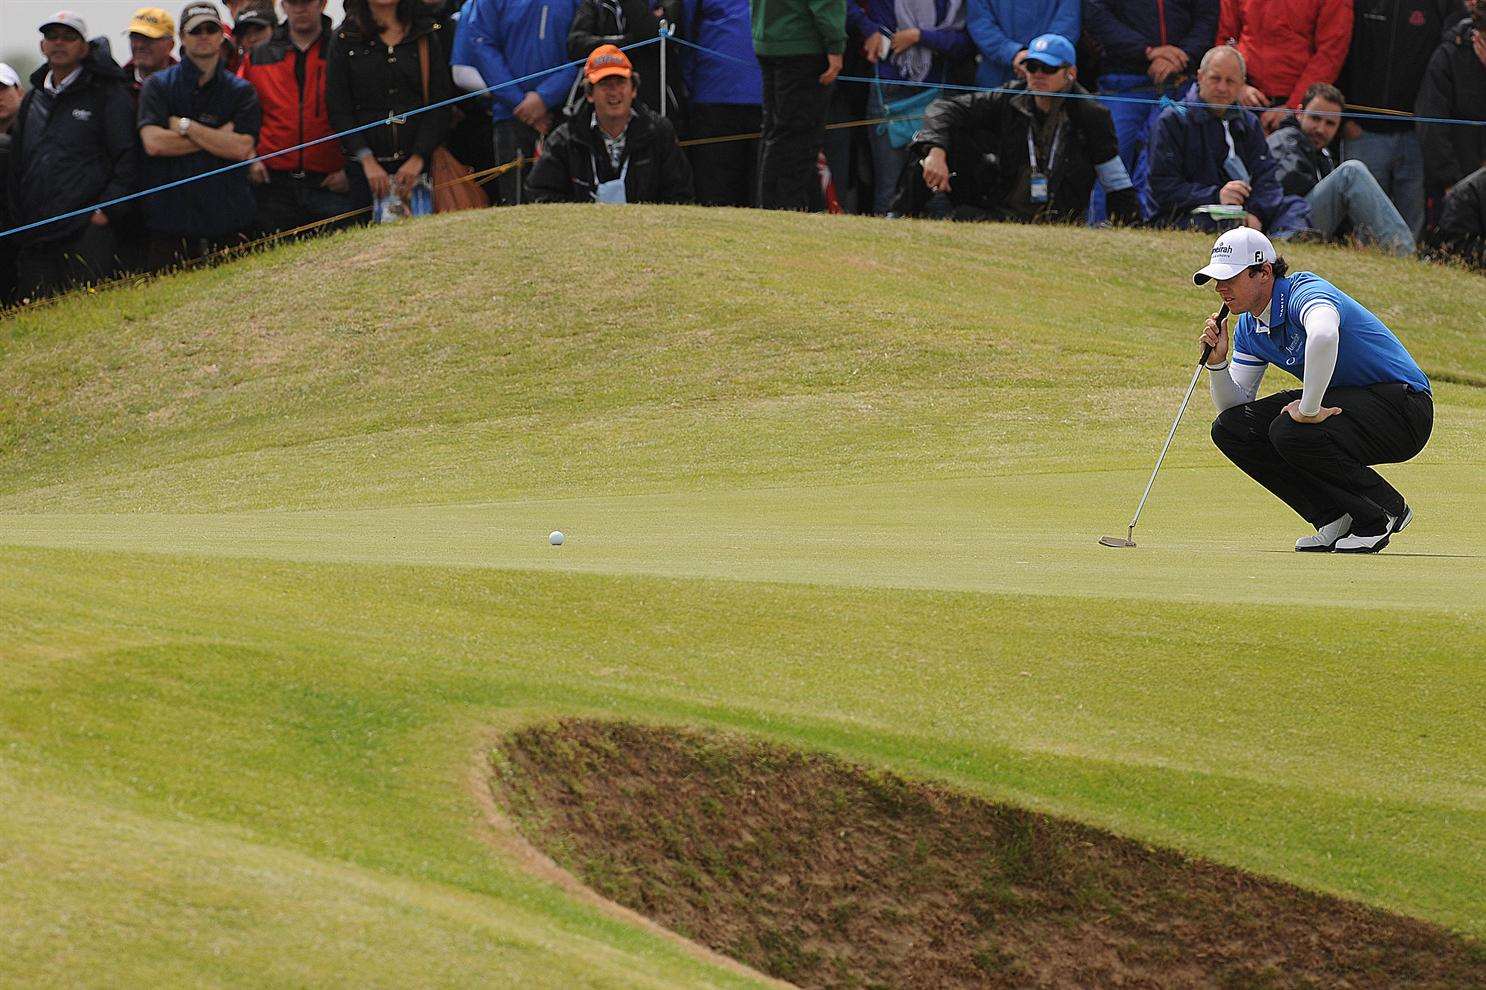 Current Open champion Rory McIlroy on the 10th green at Royal St George's in 2011, a customer of Farmura Environmental